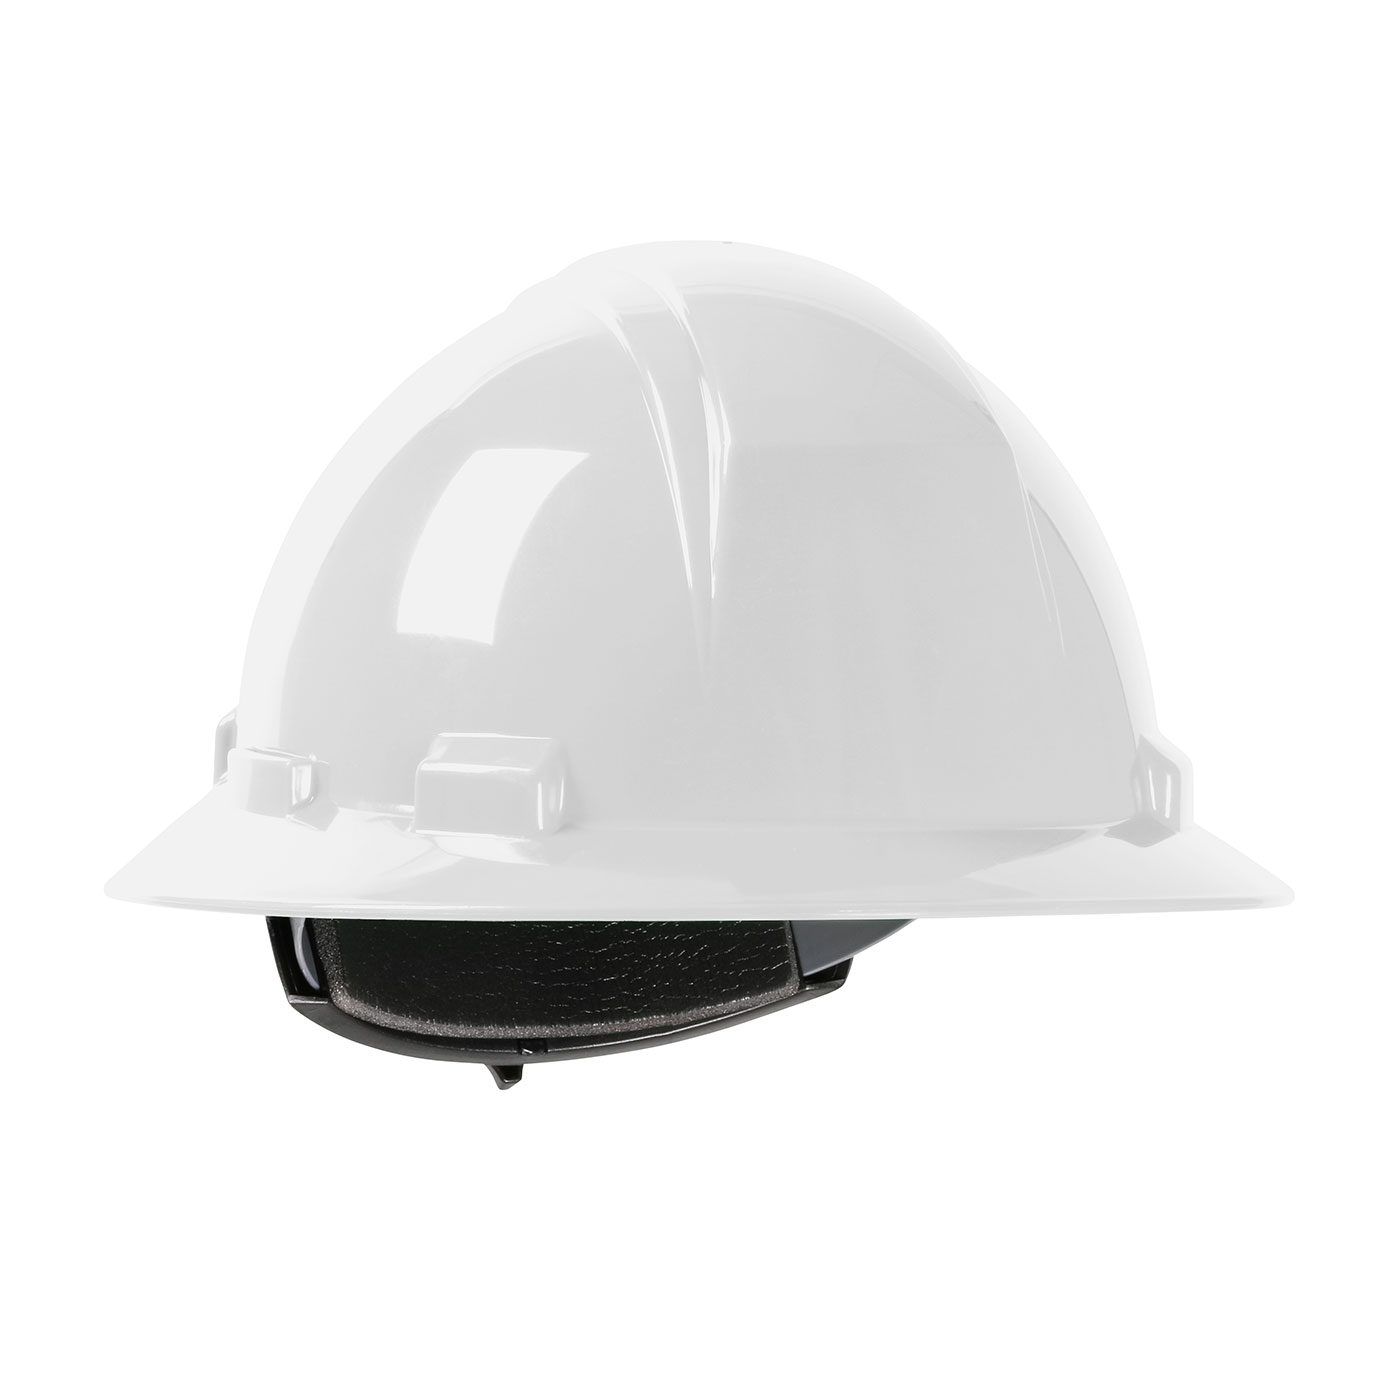 280-HP261R PIP® Dynamic Kilimanjaro™ Full Brim Hard Hat with HDPE Shell, 4-Point Textile Suspension and Wheel Ratchet Adjustment- White